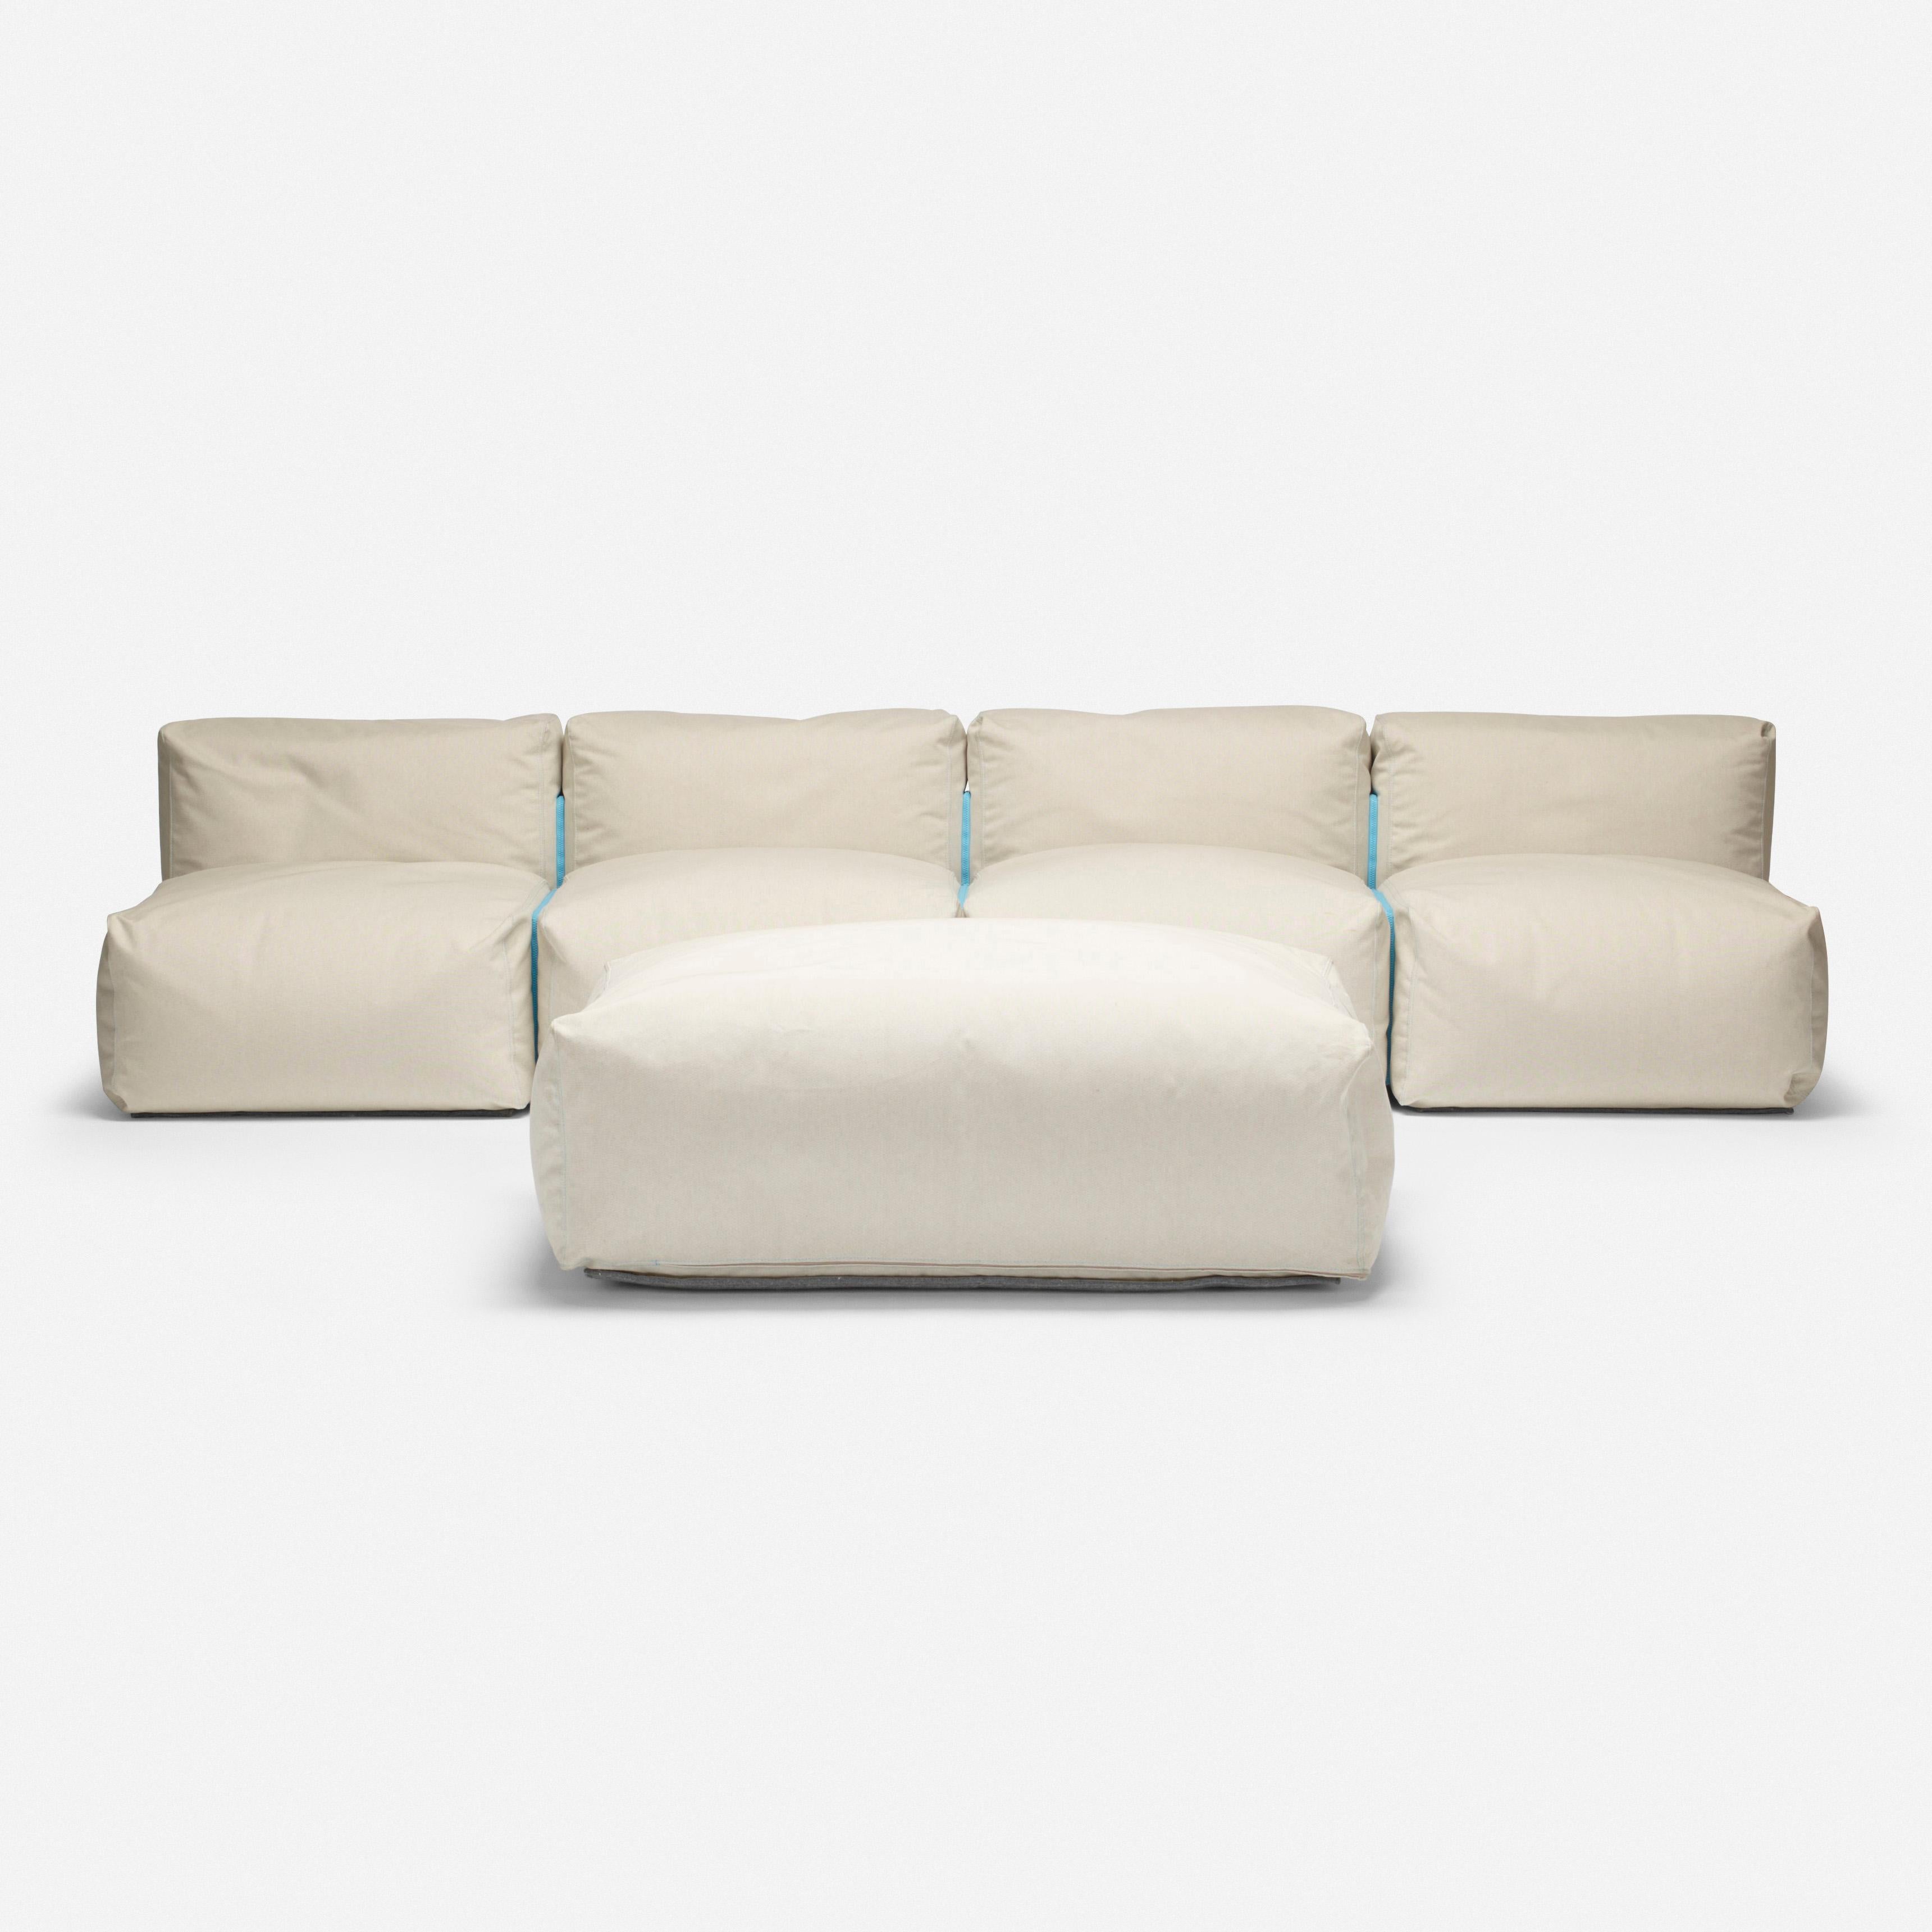 Made by: Cappellini, United Kingdom / Italy, 2004

Material: canvas upholstery

Size: 112 W × 36 D × 25 H in, seat height 13 inches

Description: Ottoman measures: 44 W x 39 D x 16 H inches. Sofa is composed of four seating elements with blue